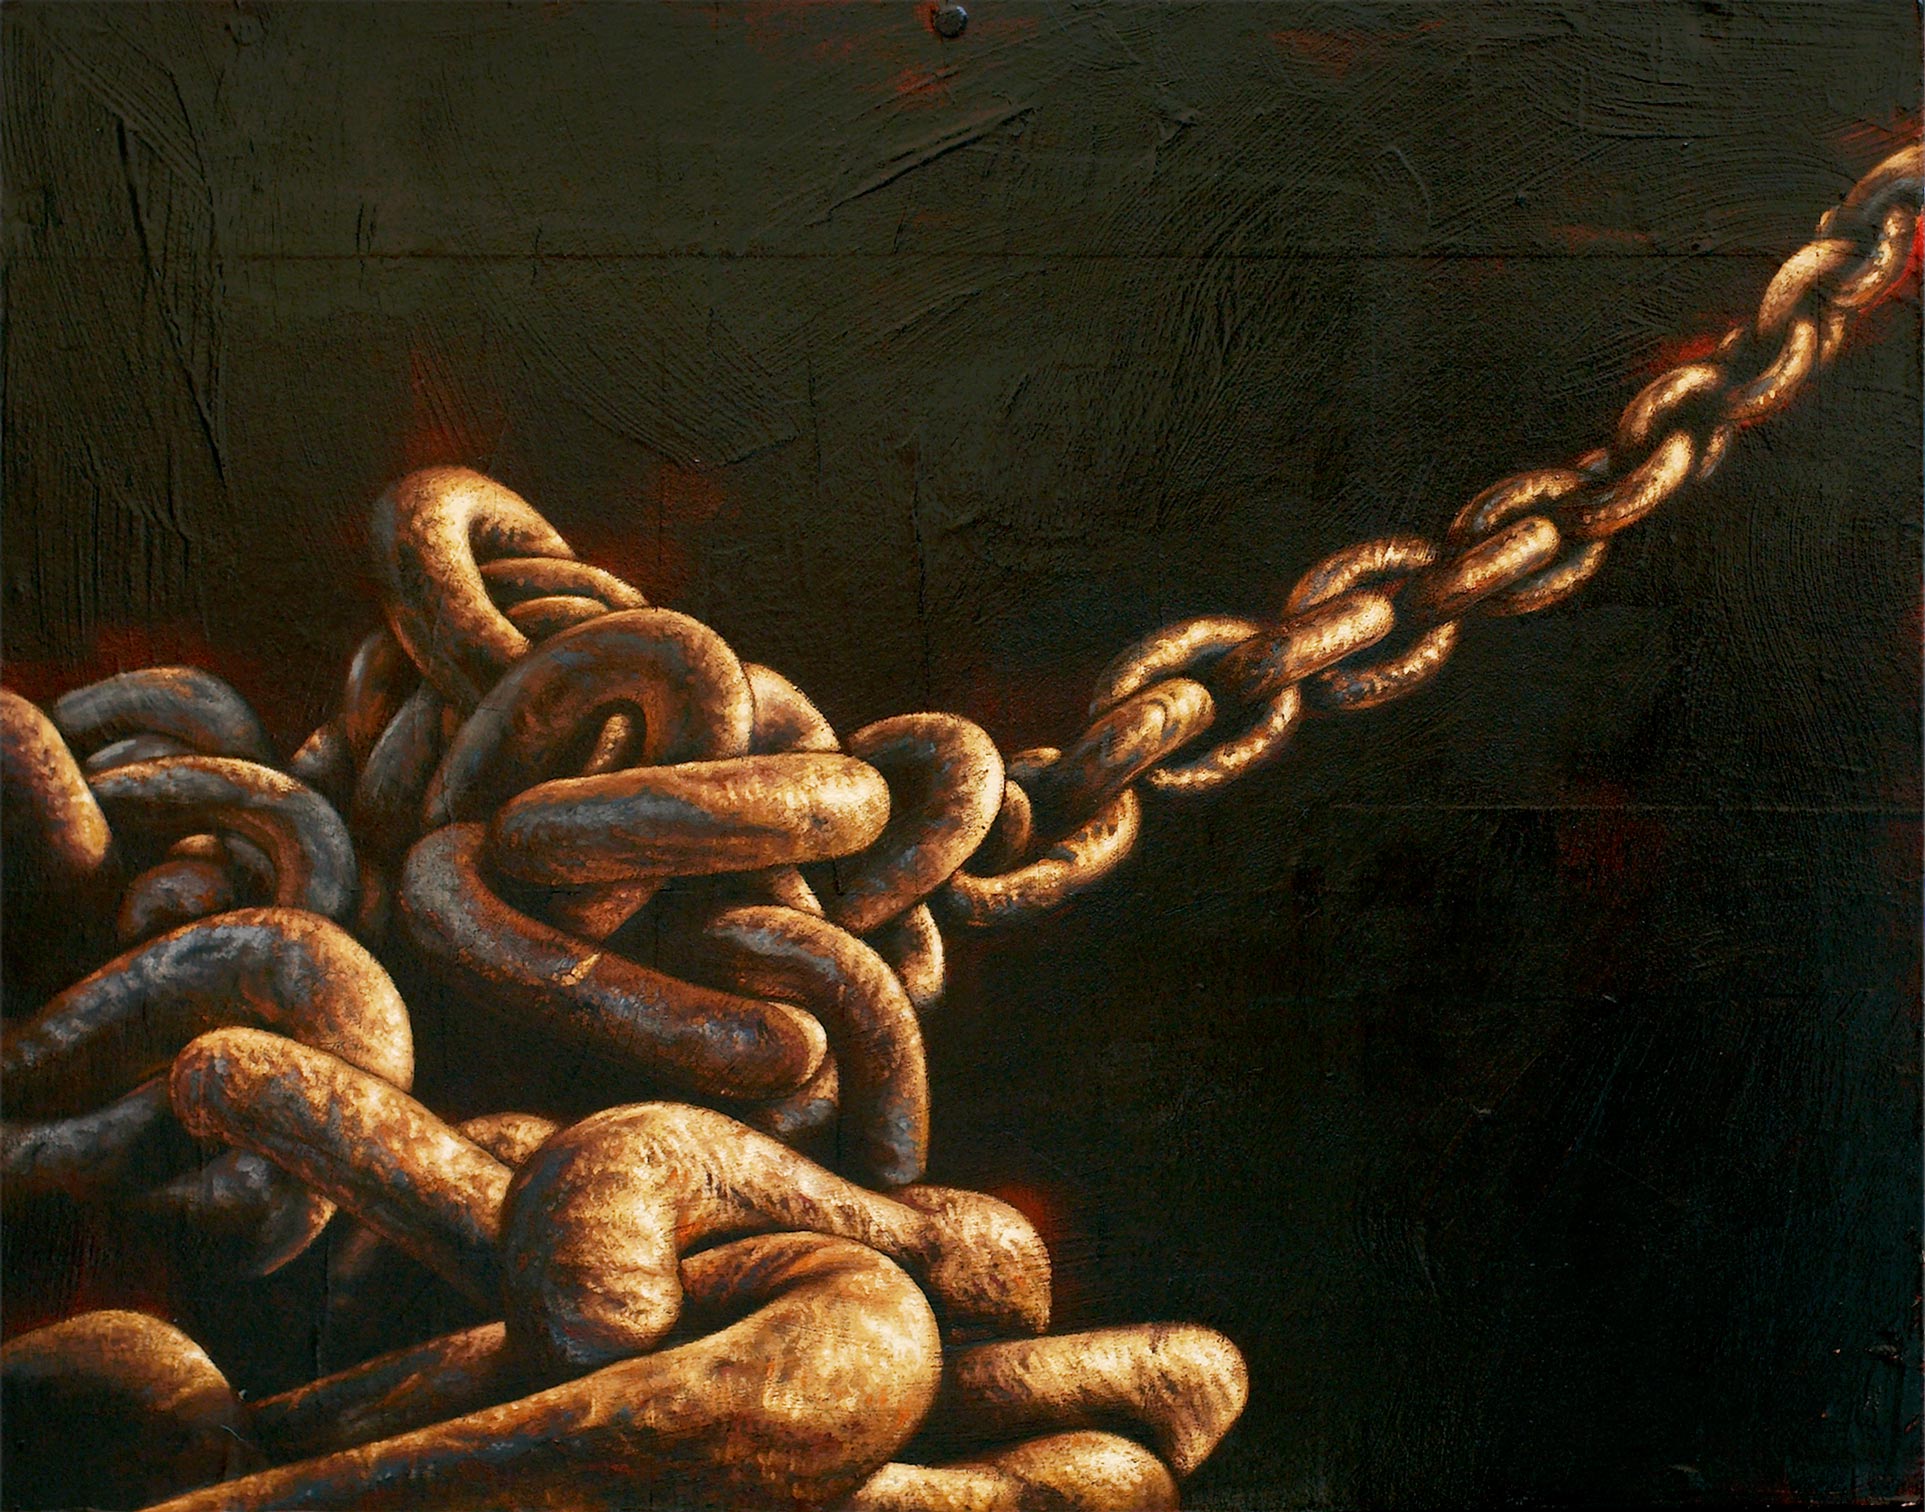    Chains Holding   Mixed Media Painting 22in x 18in 